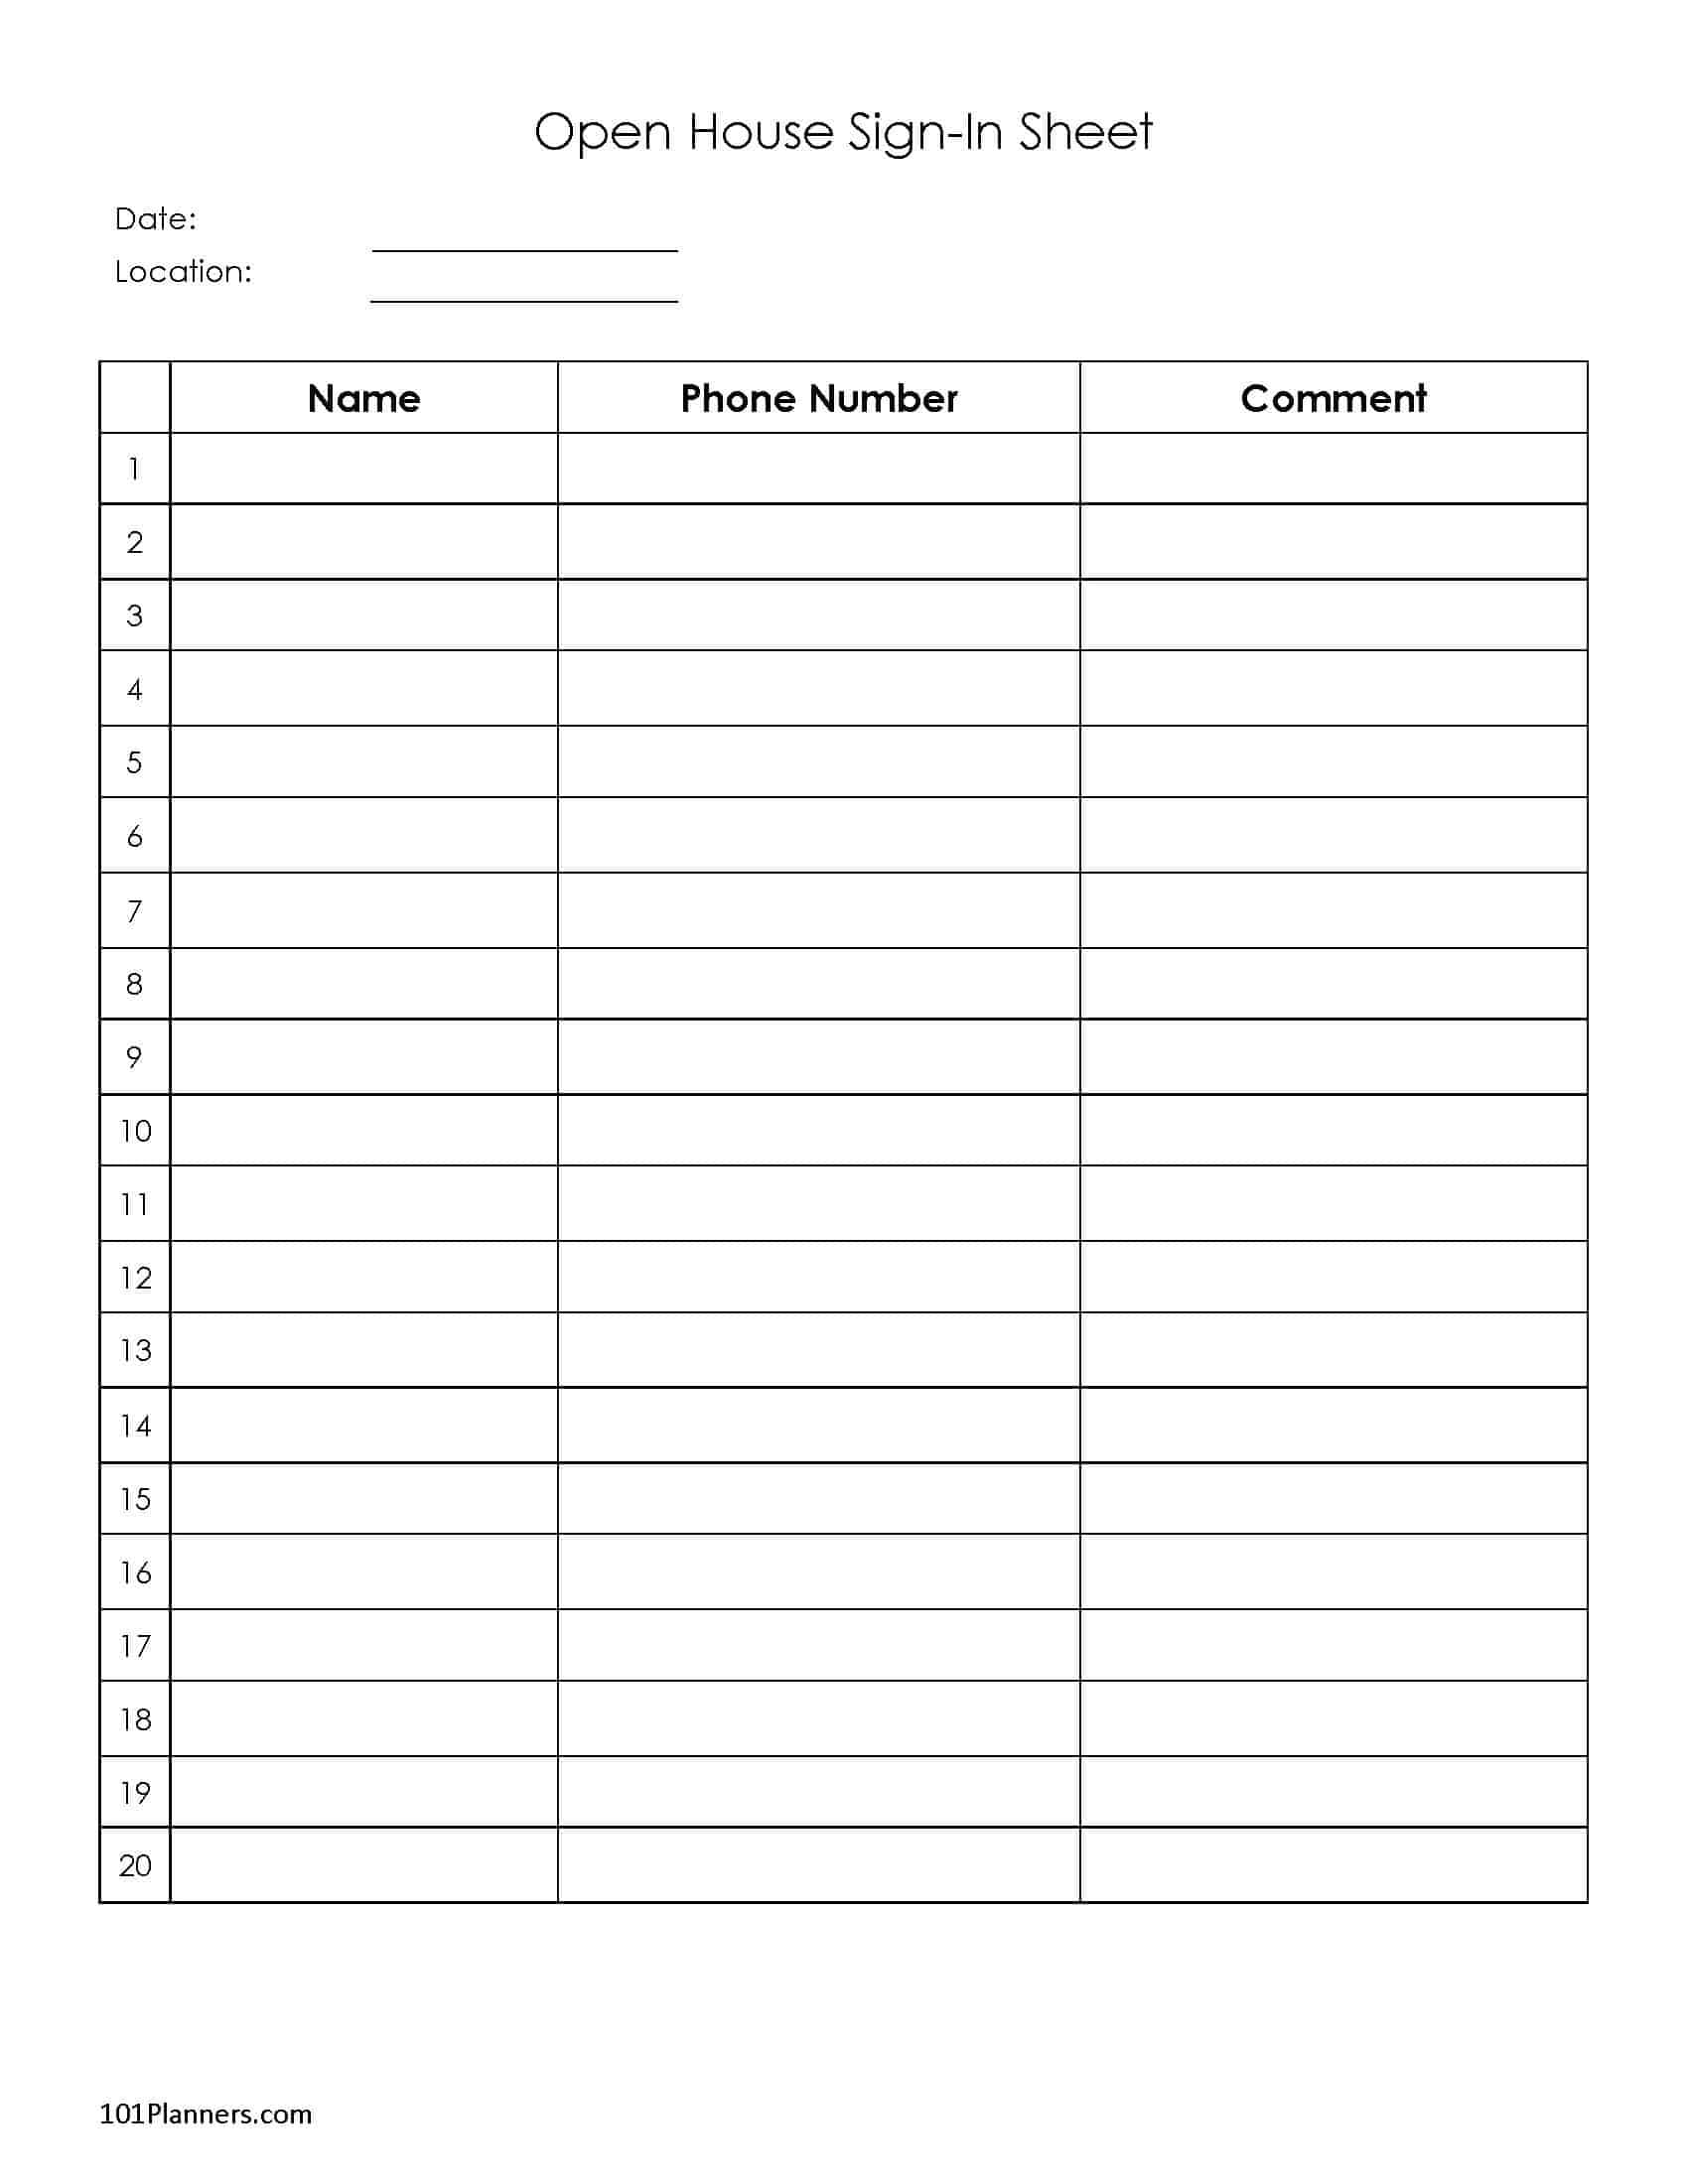 free-sign-up-sheet-sign-in-sheet-instant-download-free-printable